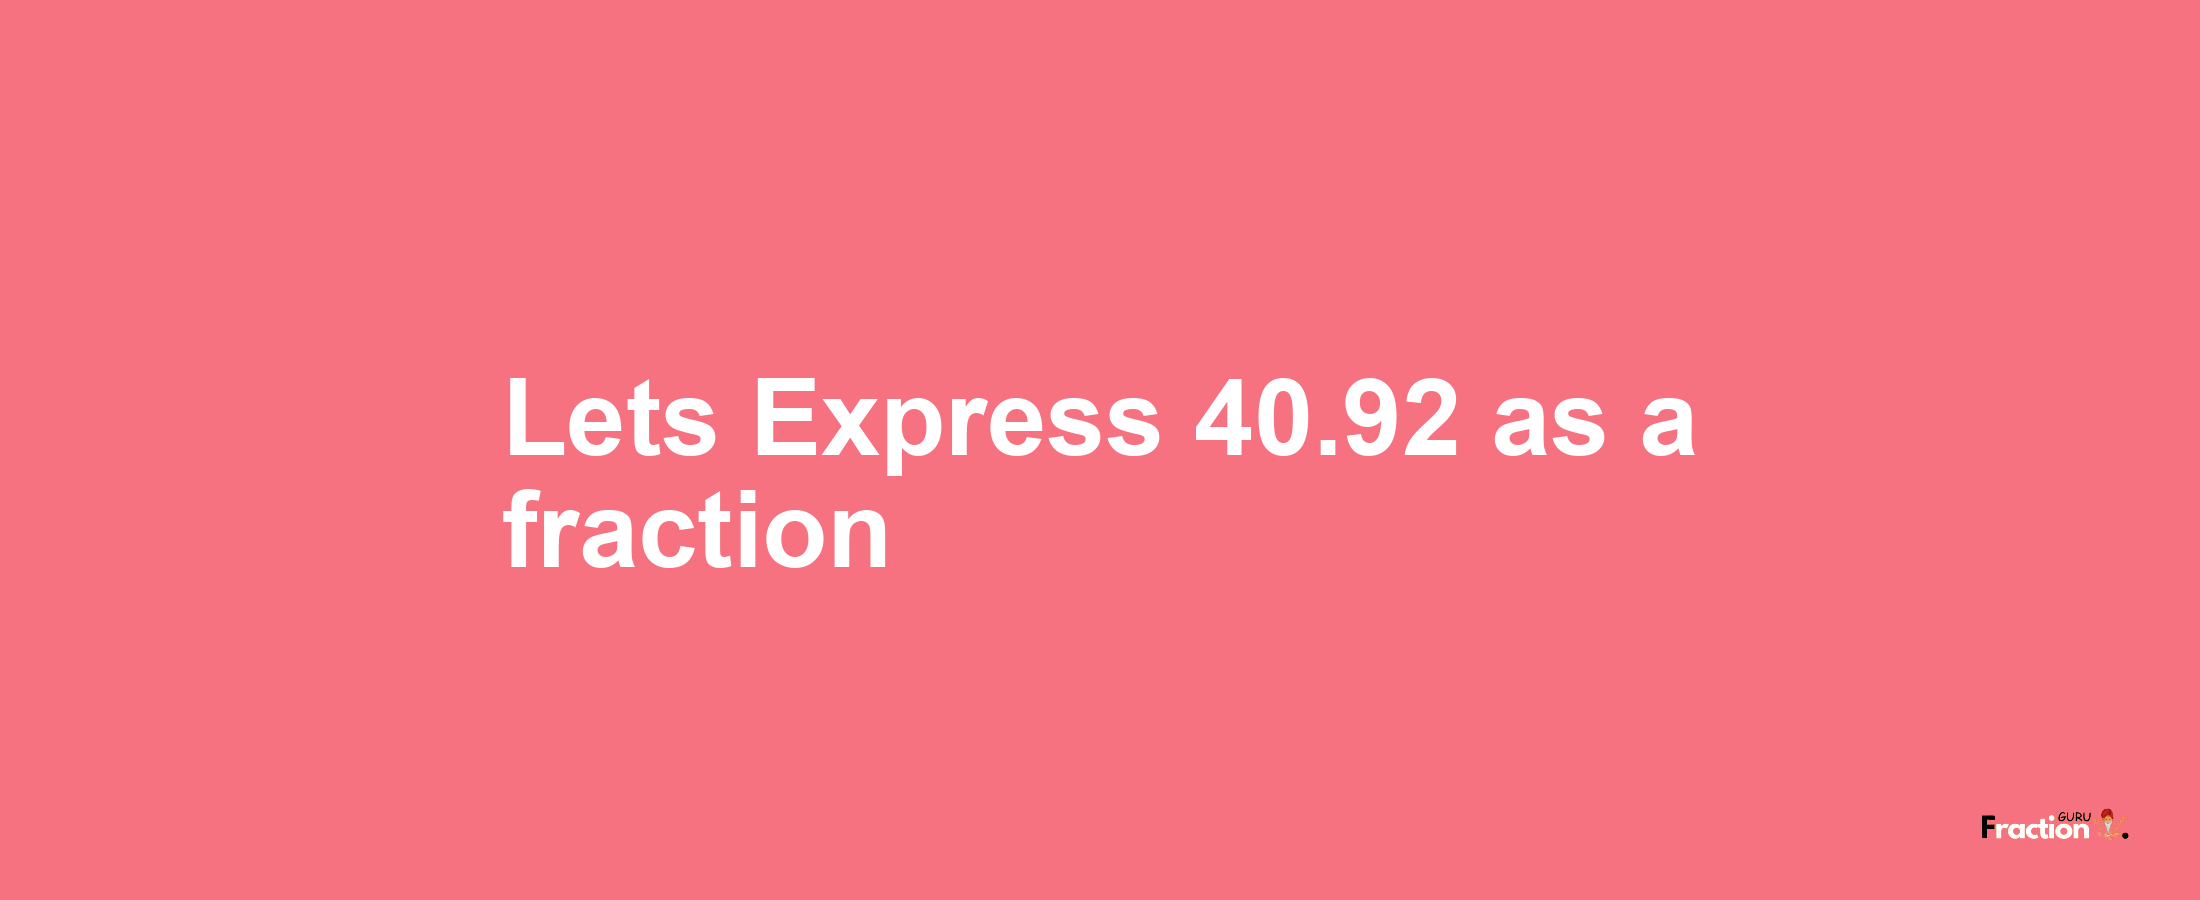 Lets Express 40.92 as afraction